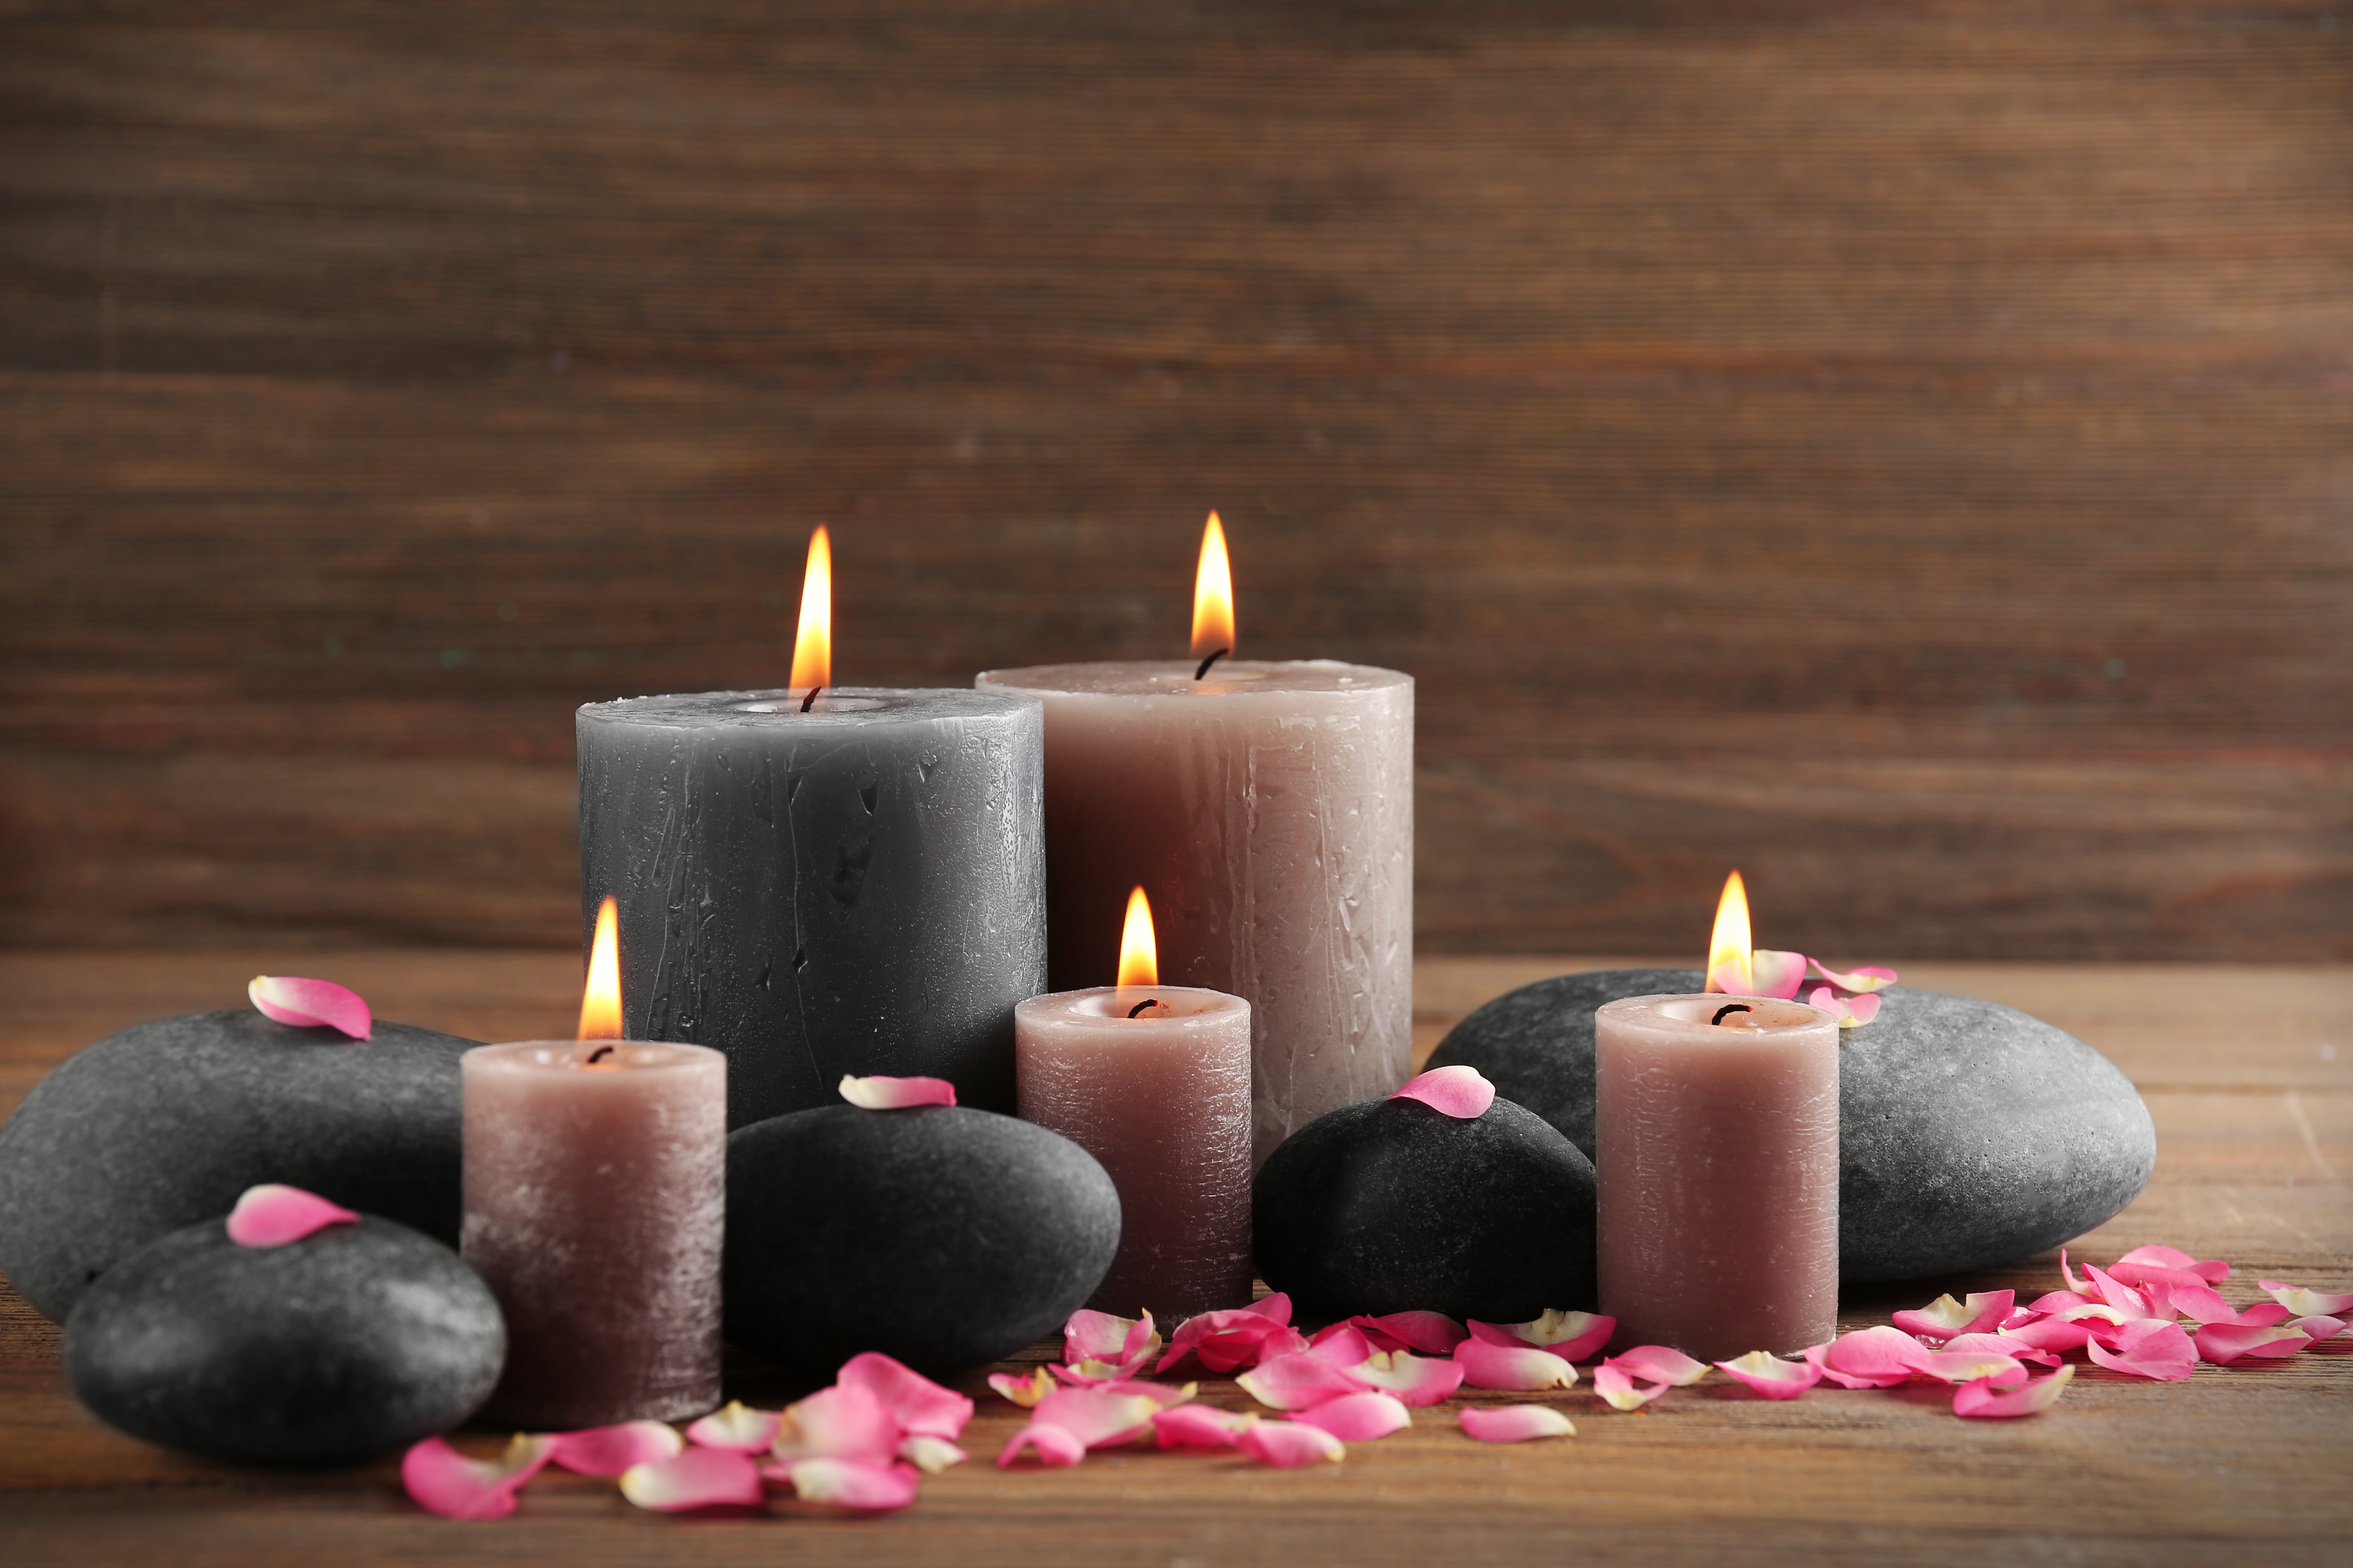 Why Are Scented Candles So Darn Expensive? - Jeffrey Tucker - Liberty.me